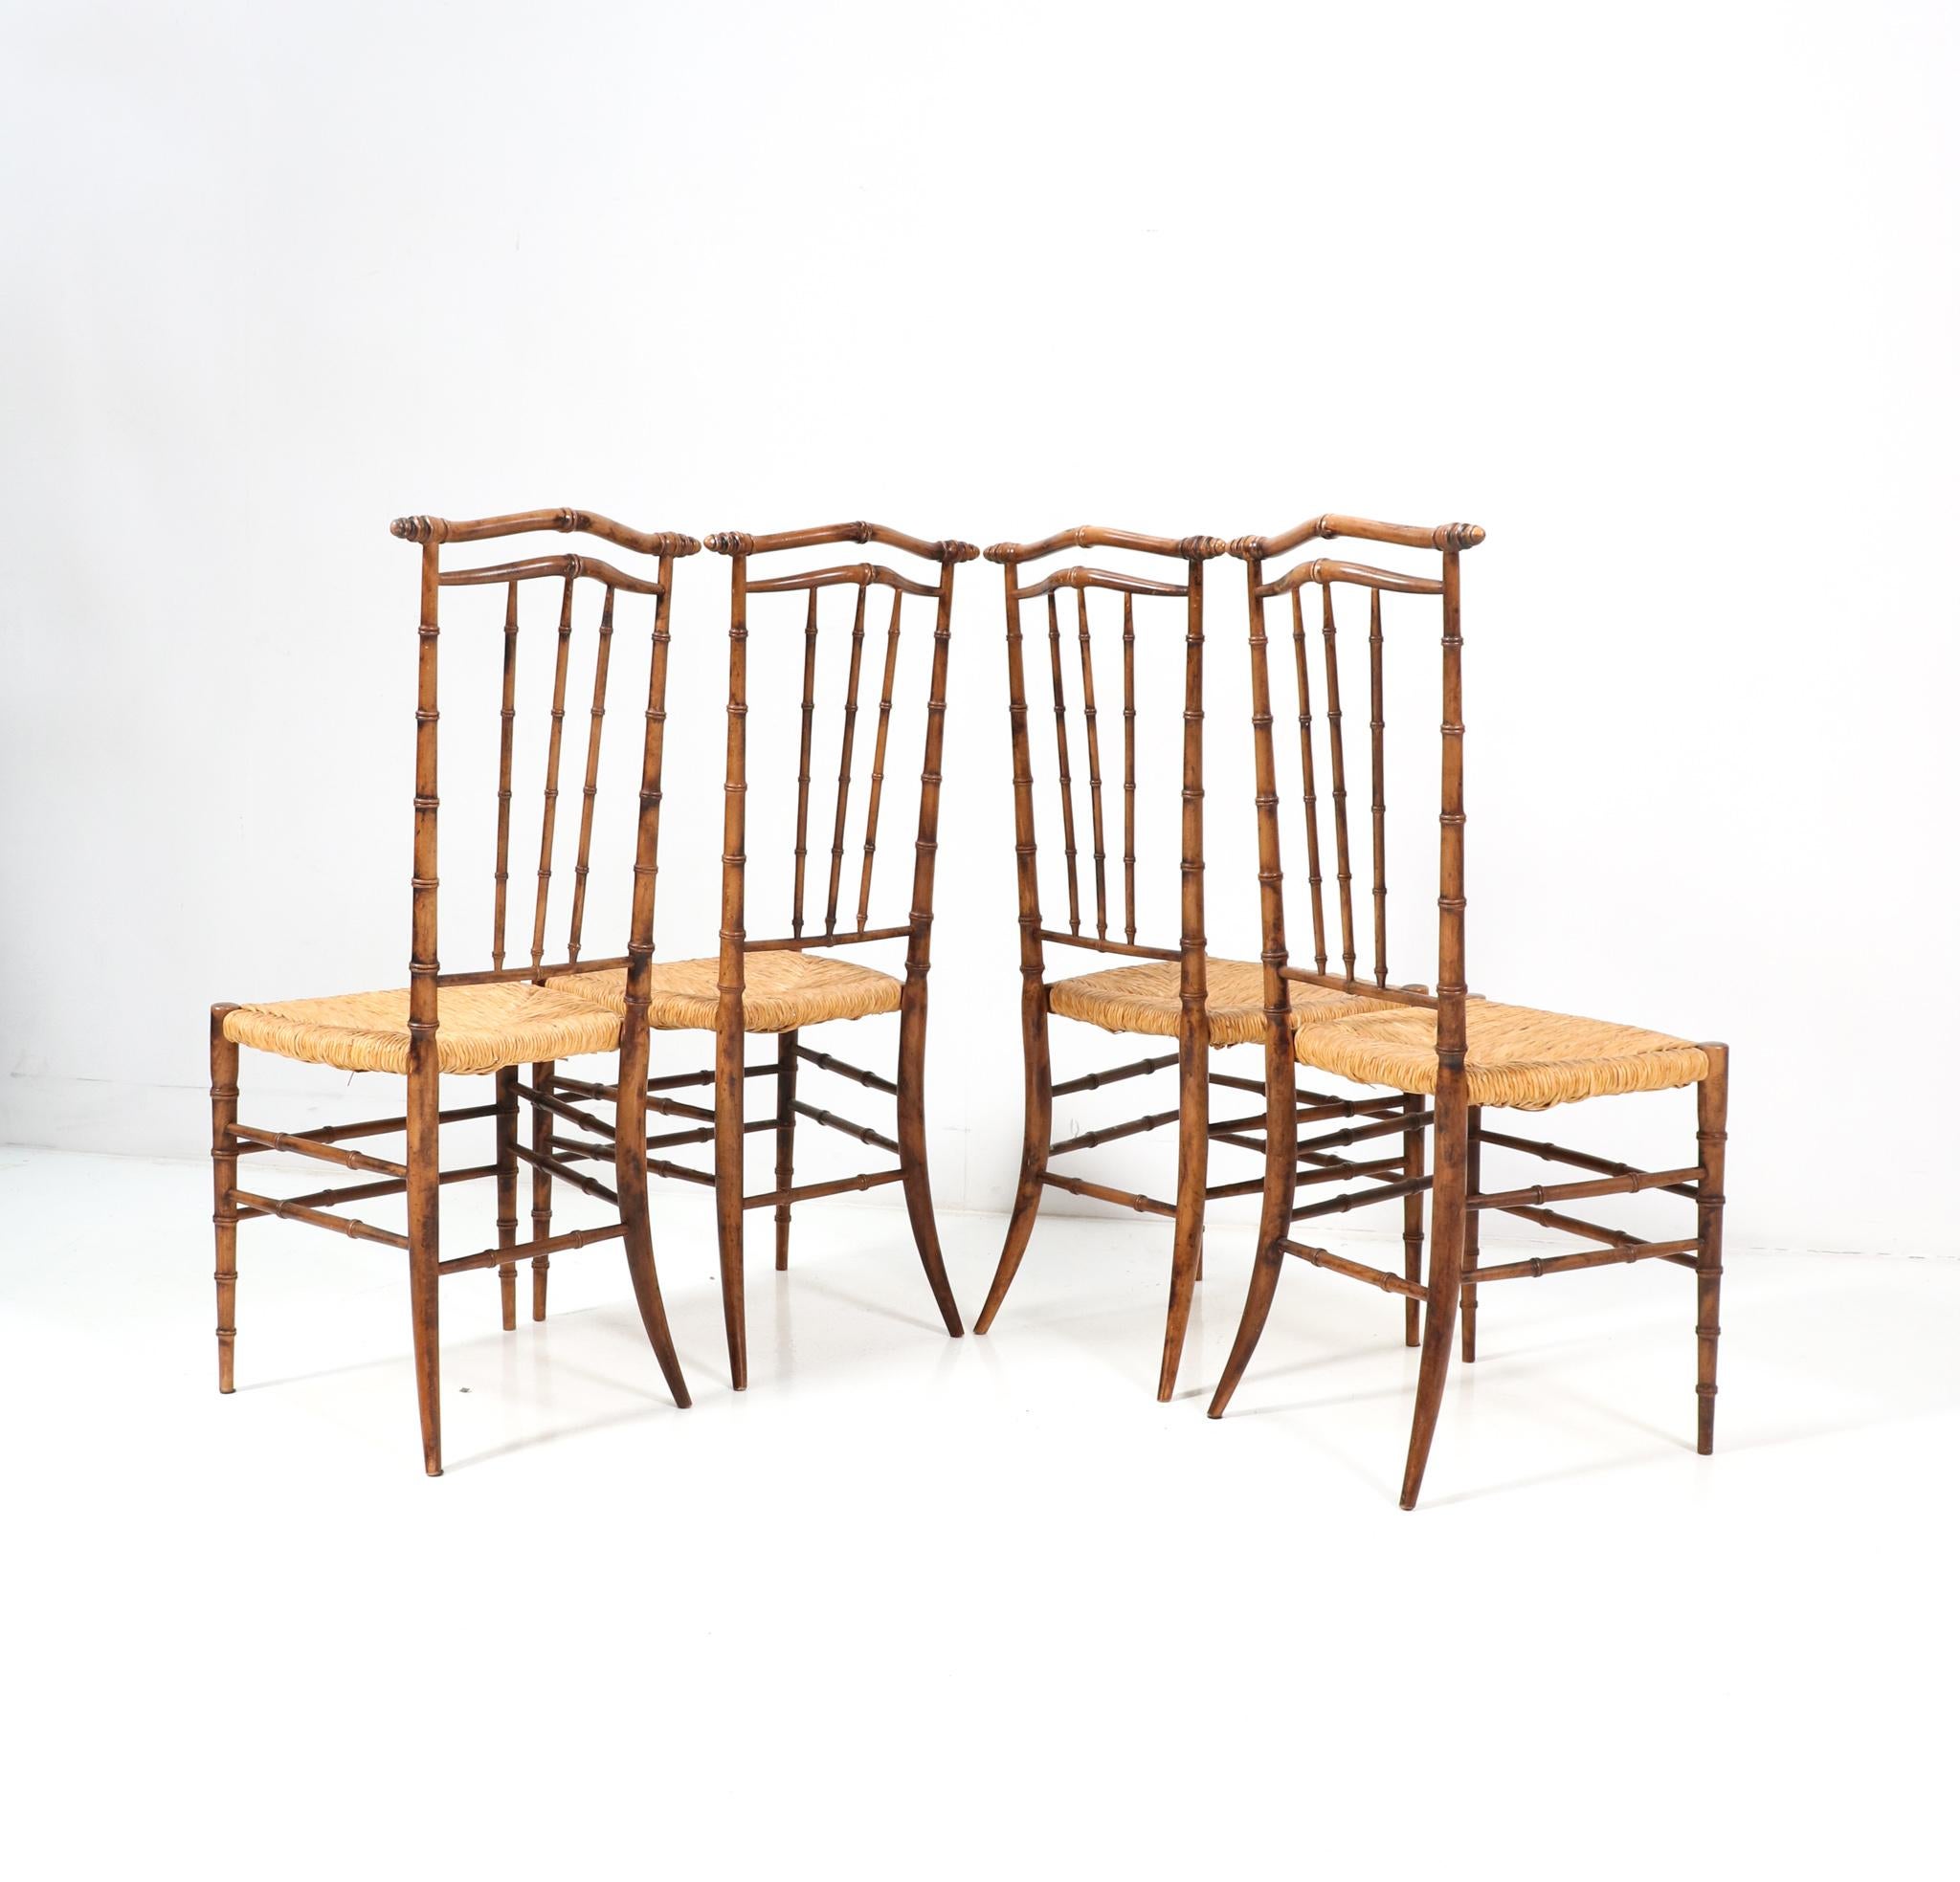 Late 20th Century Four Beech Mid-Century Modern Faux Bamboo High Back Dining Room Chairs, 1970s For Sale